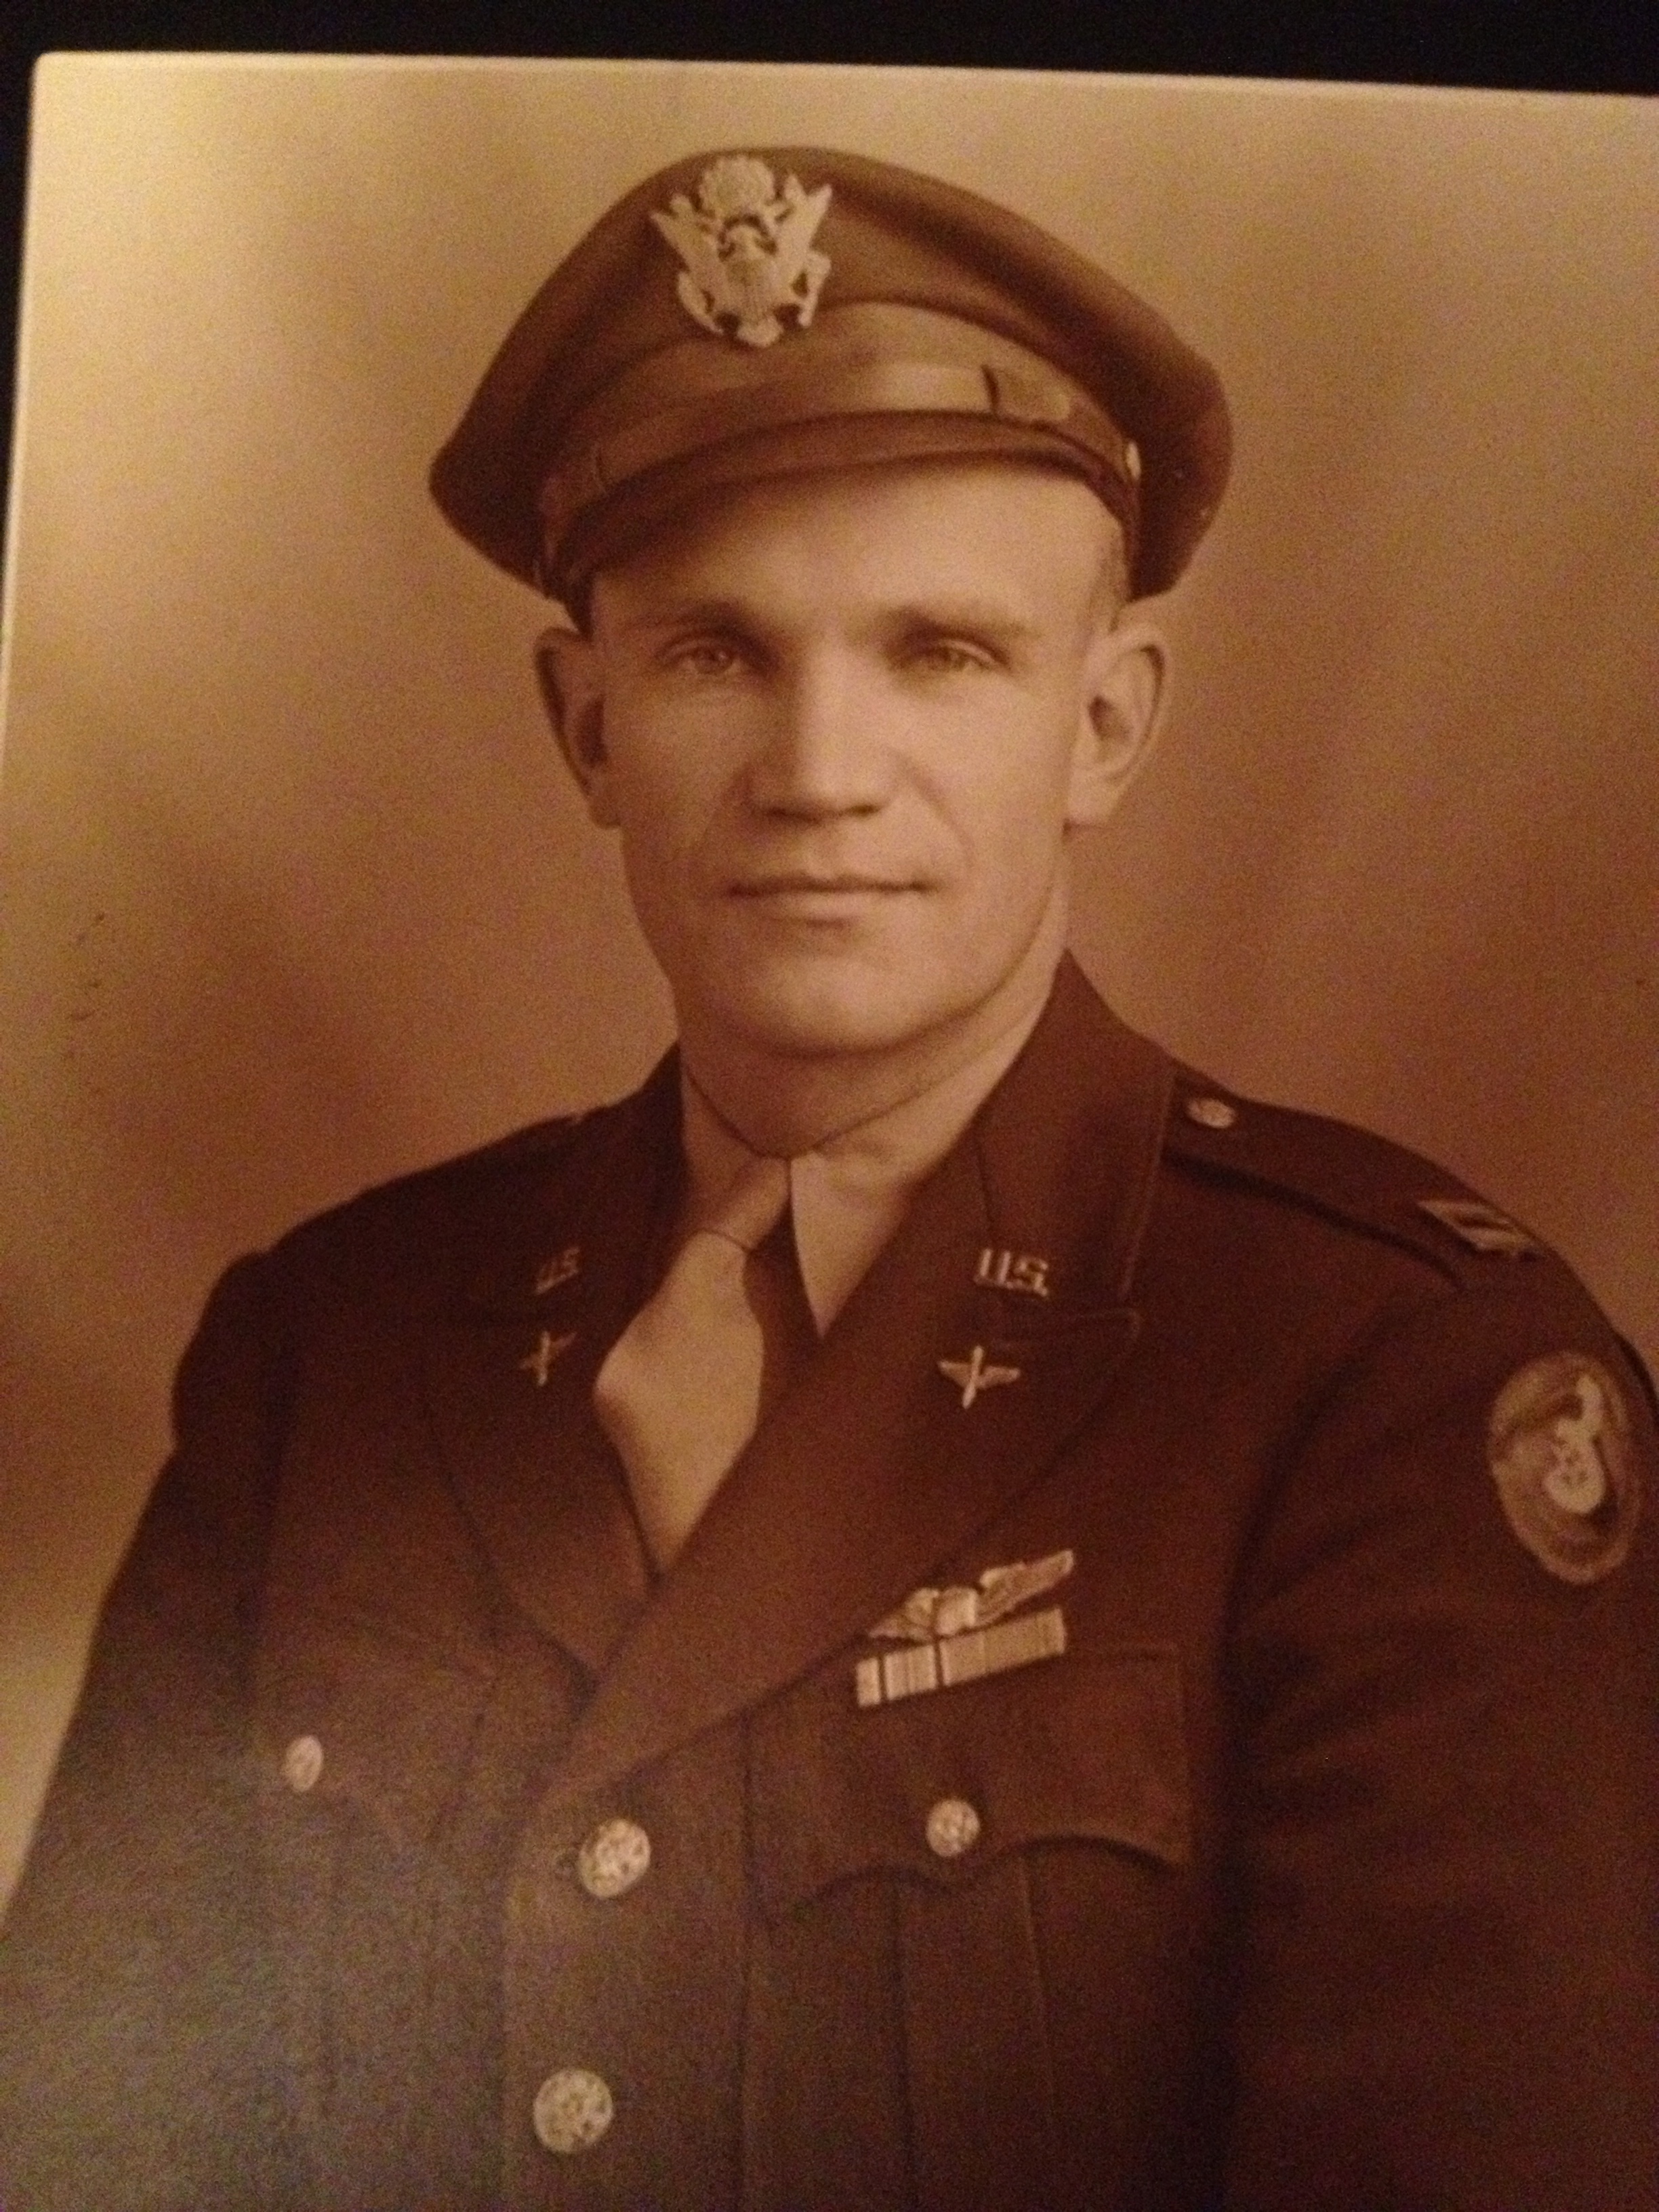 Photo of Lt. Col. E.E. Lundak hanging in wartime museum.